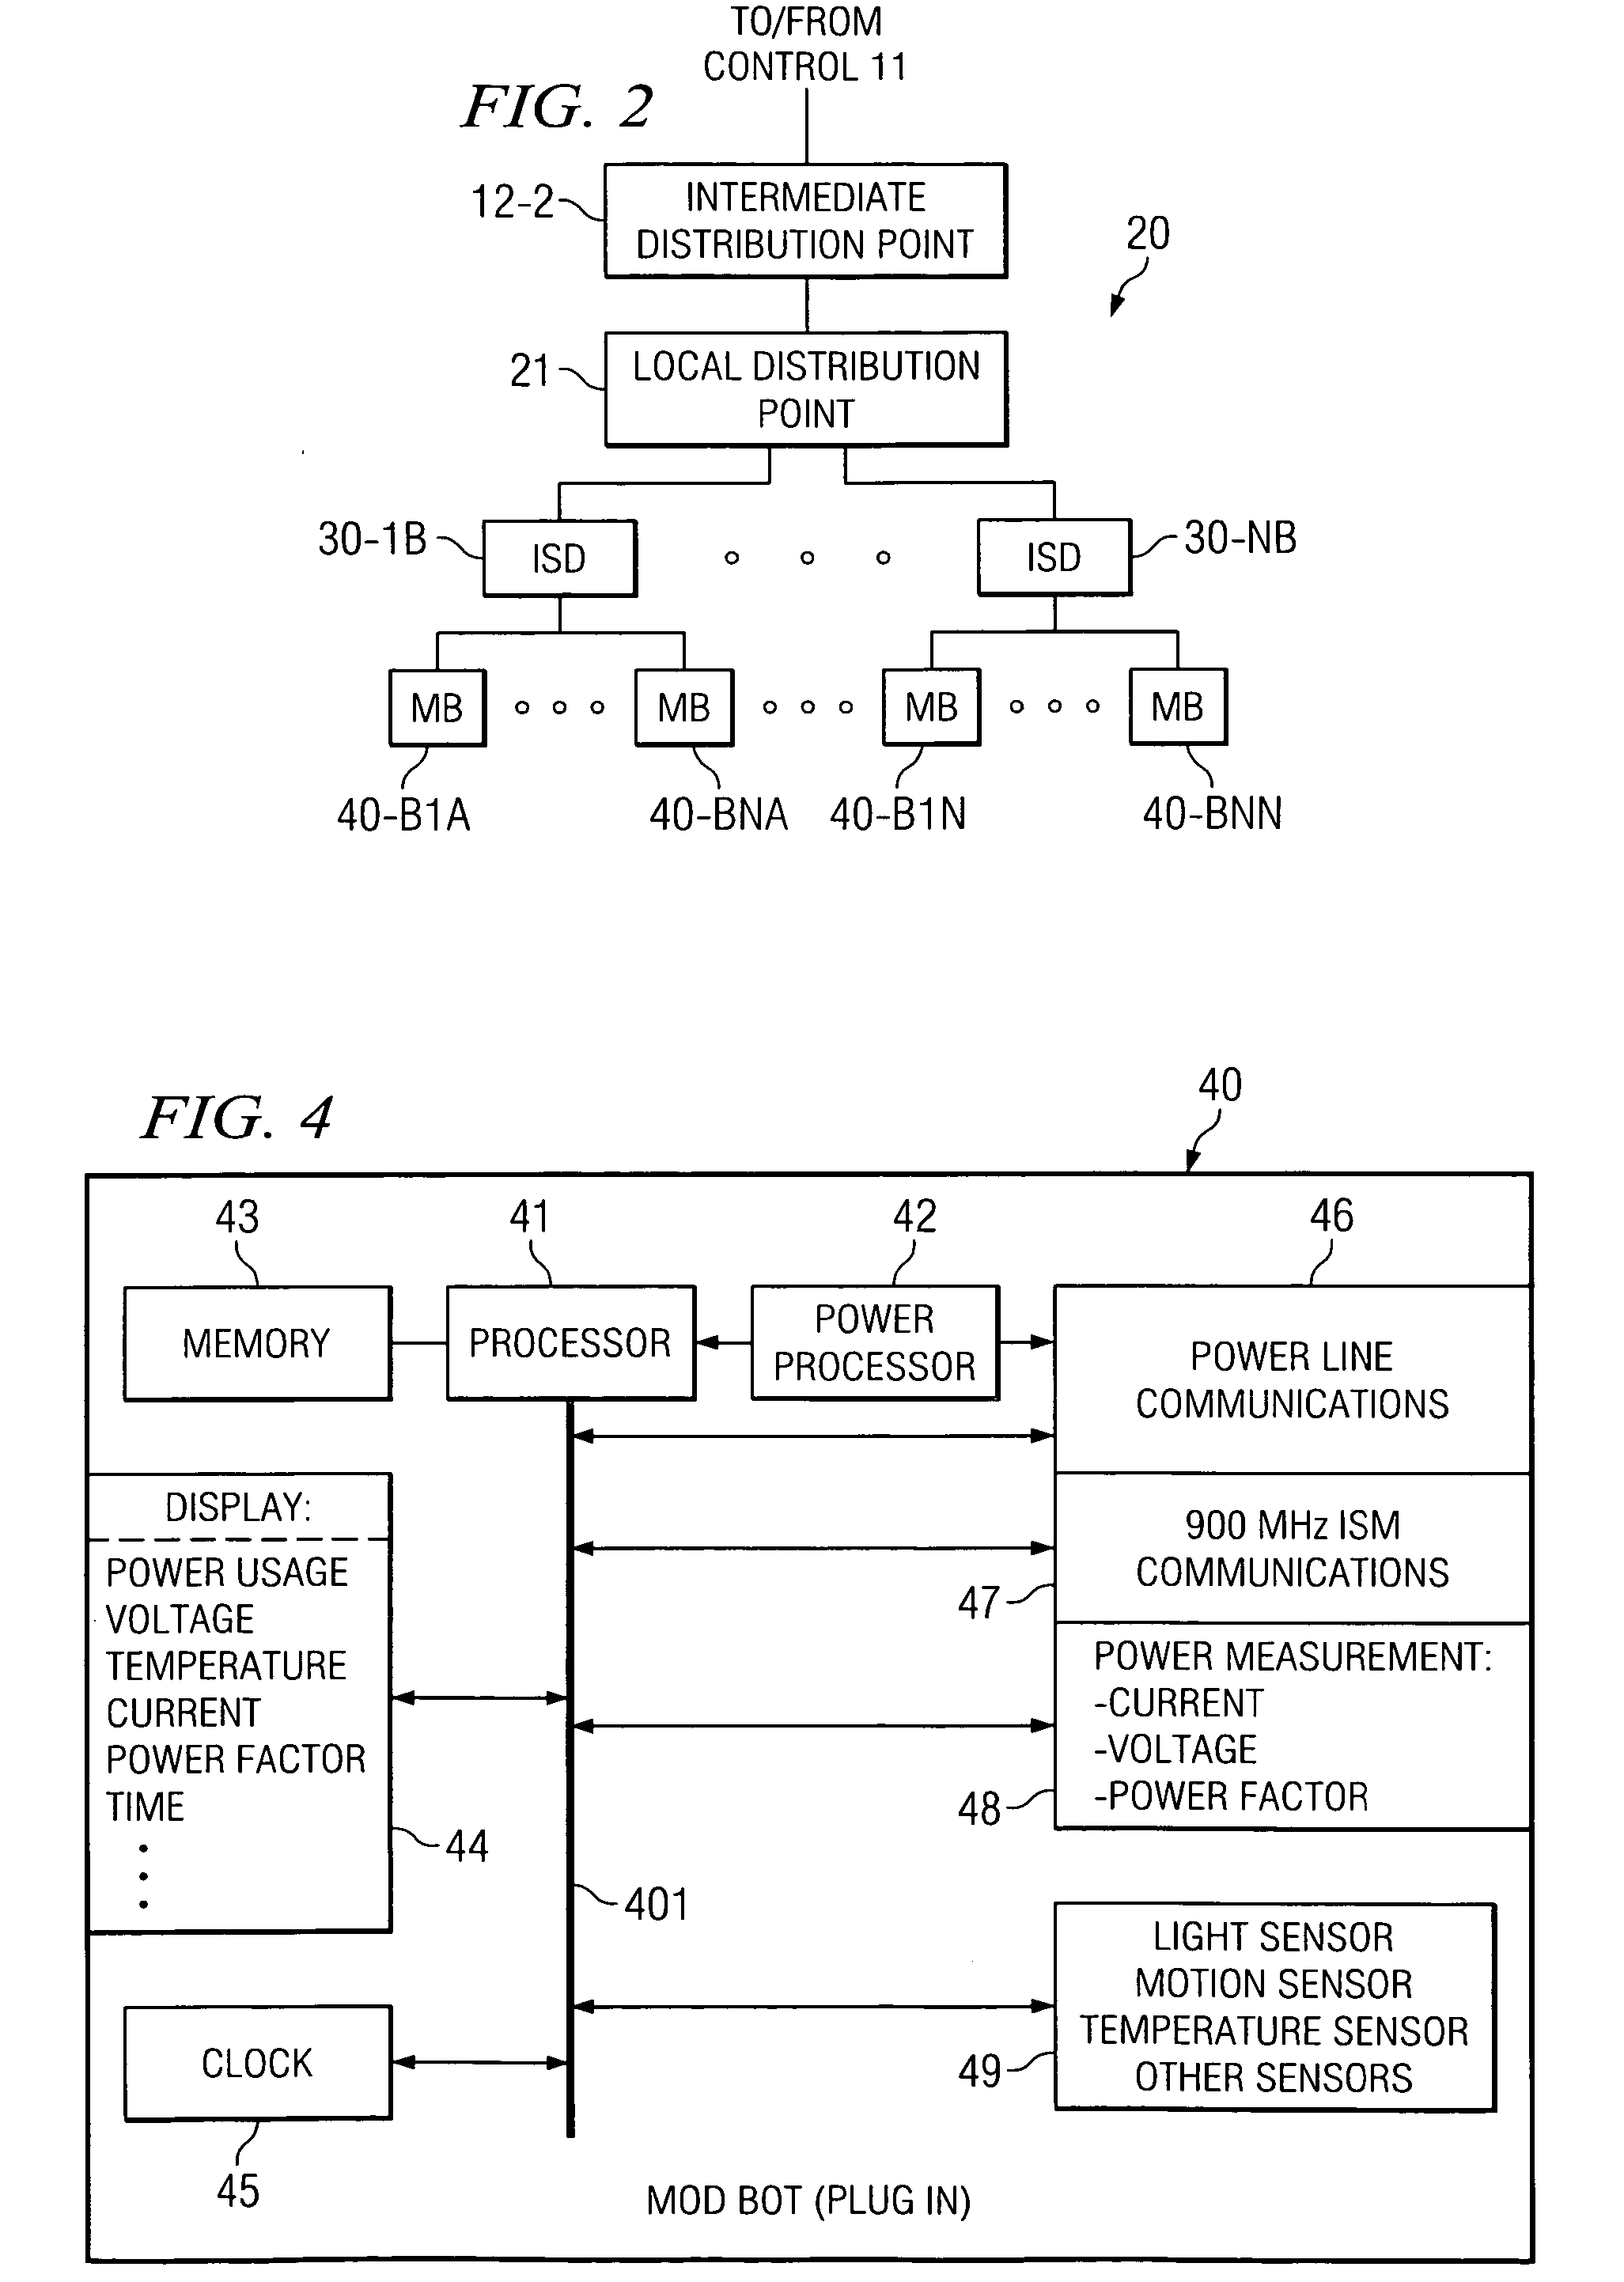 System and method for delivery and management of end-user services